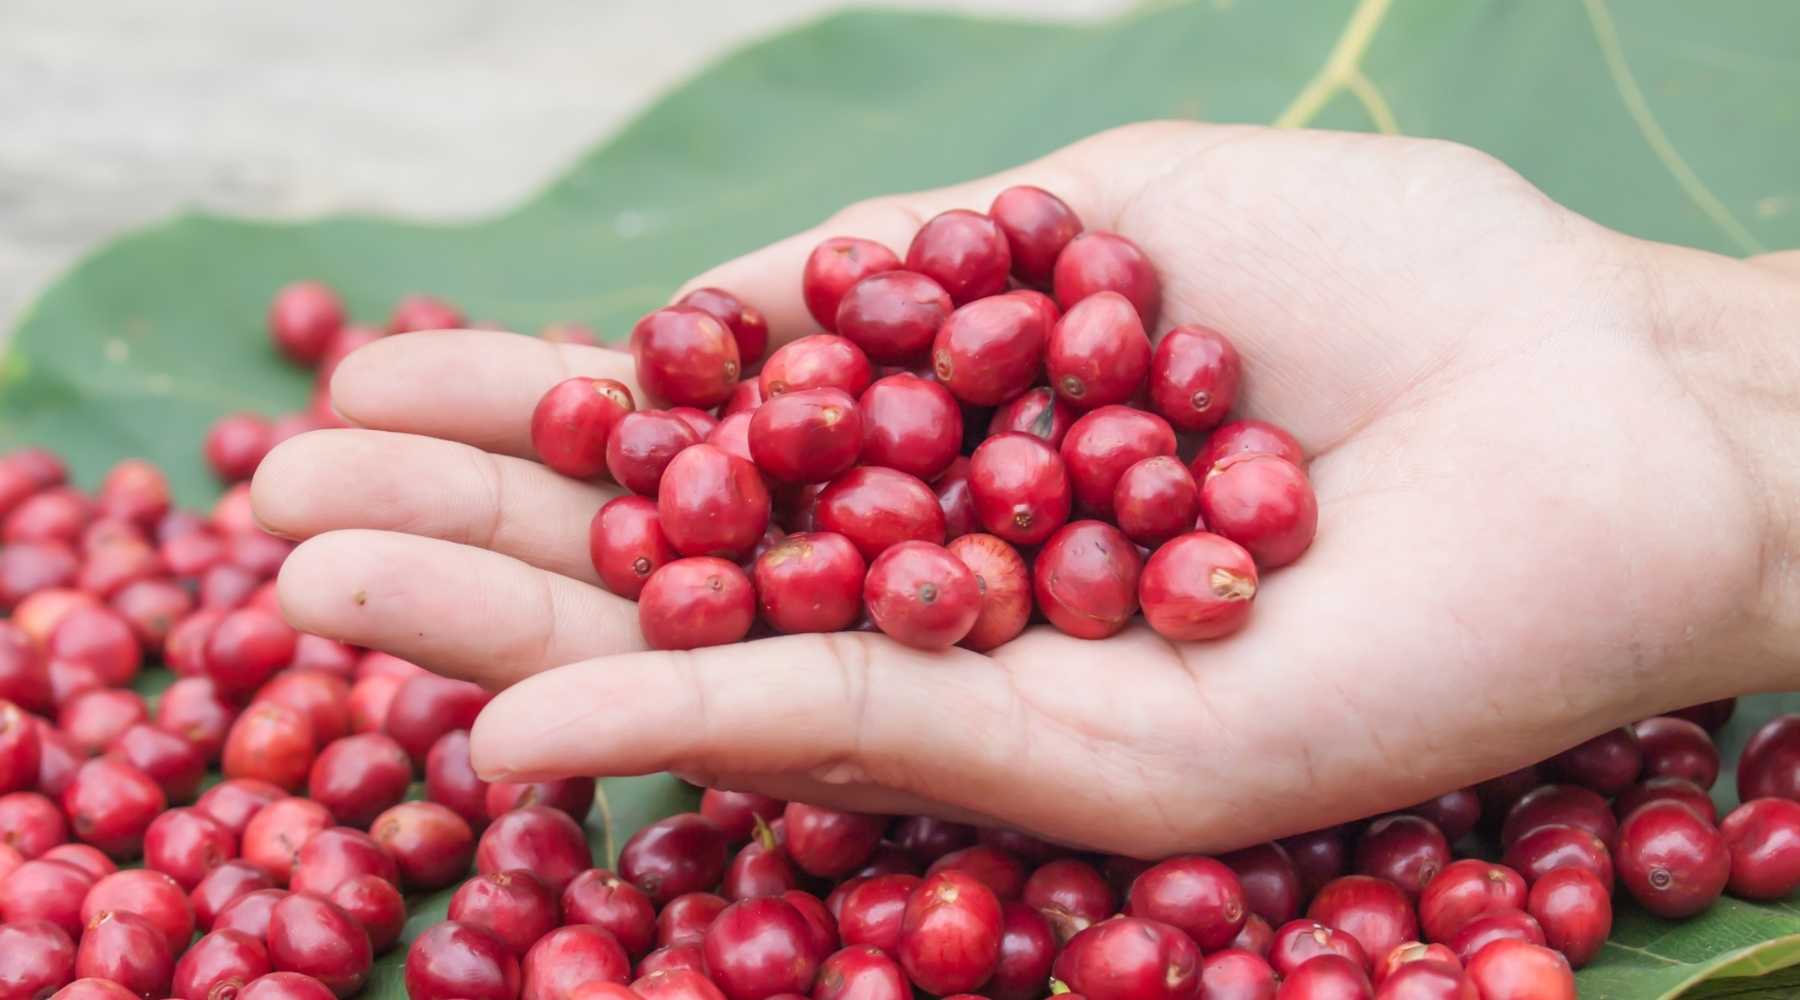 You can eat coffee cherries as a food